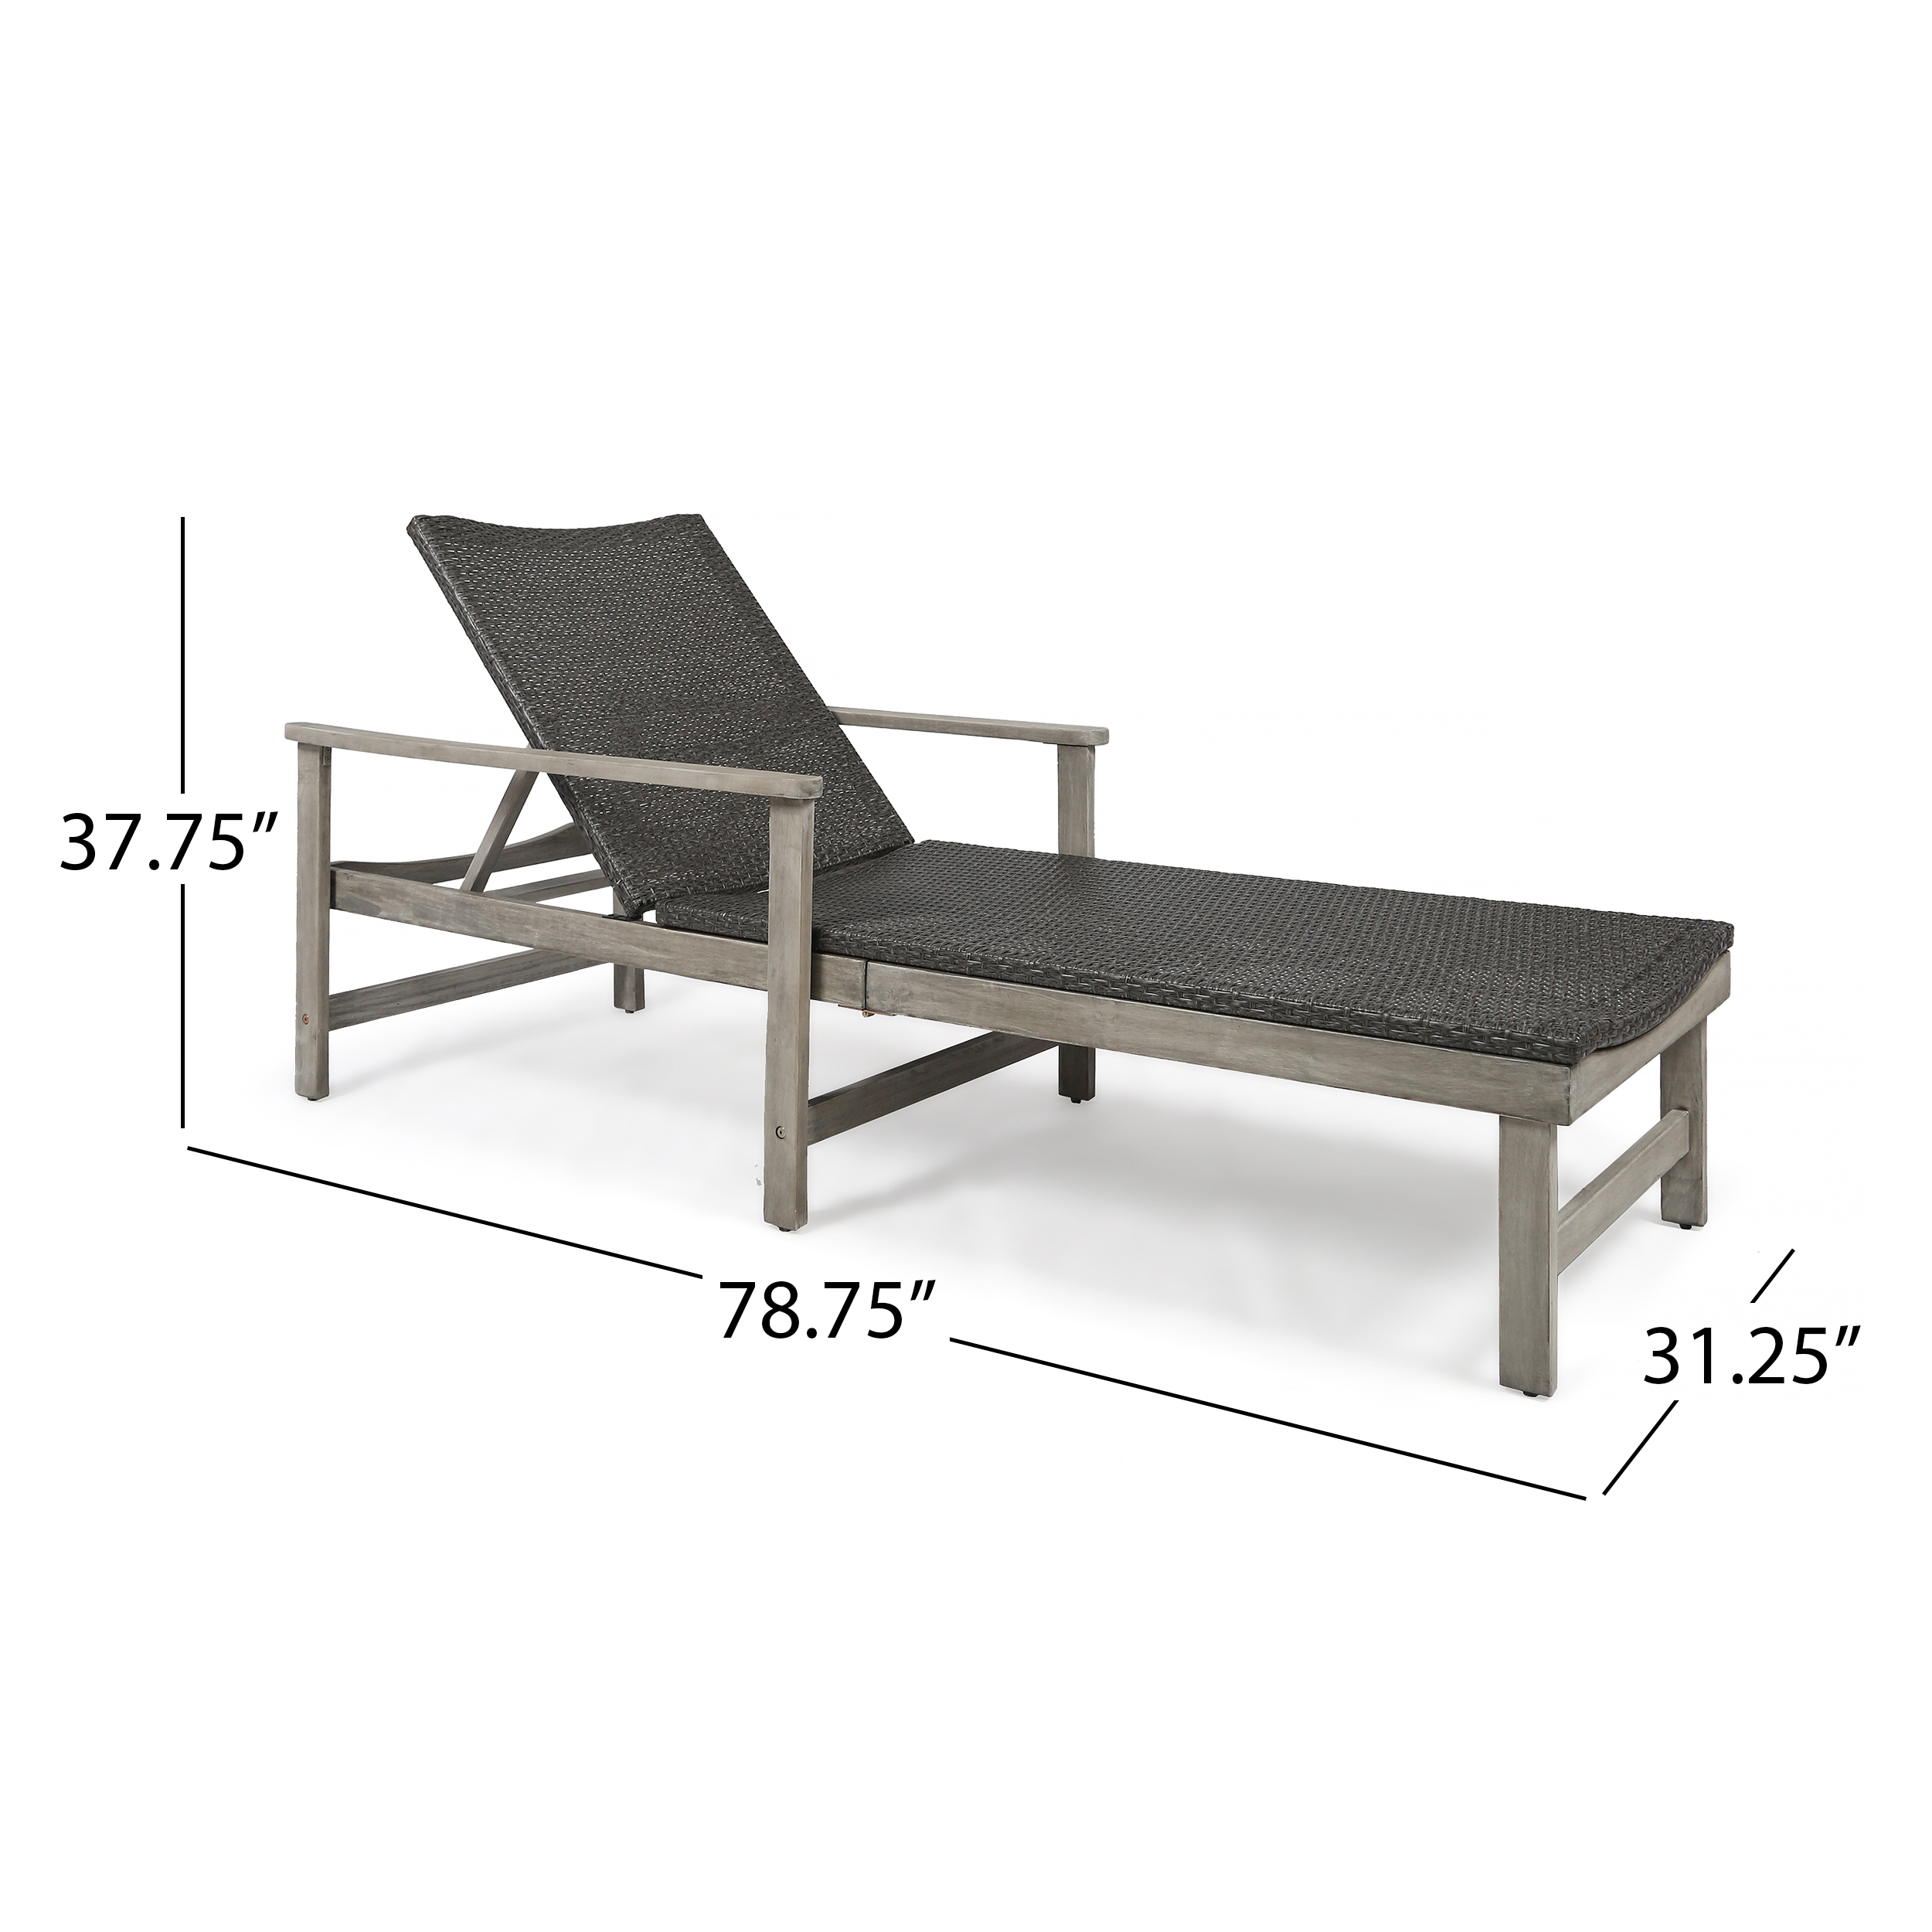 Camdyn Outdoor Rustic Acacia Wood Chaise Lounge with Wicker Seating (Set of 2), Light Gray and Mixed Black - image 3 of 7